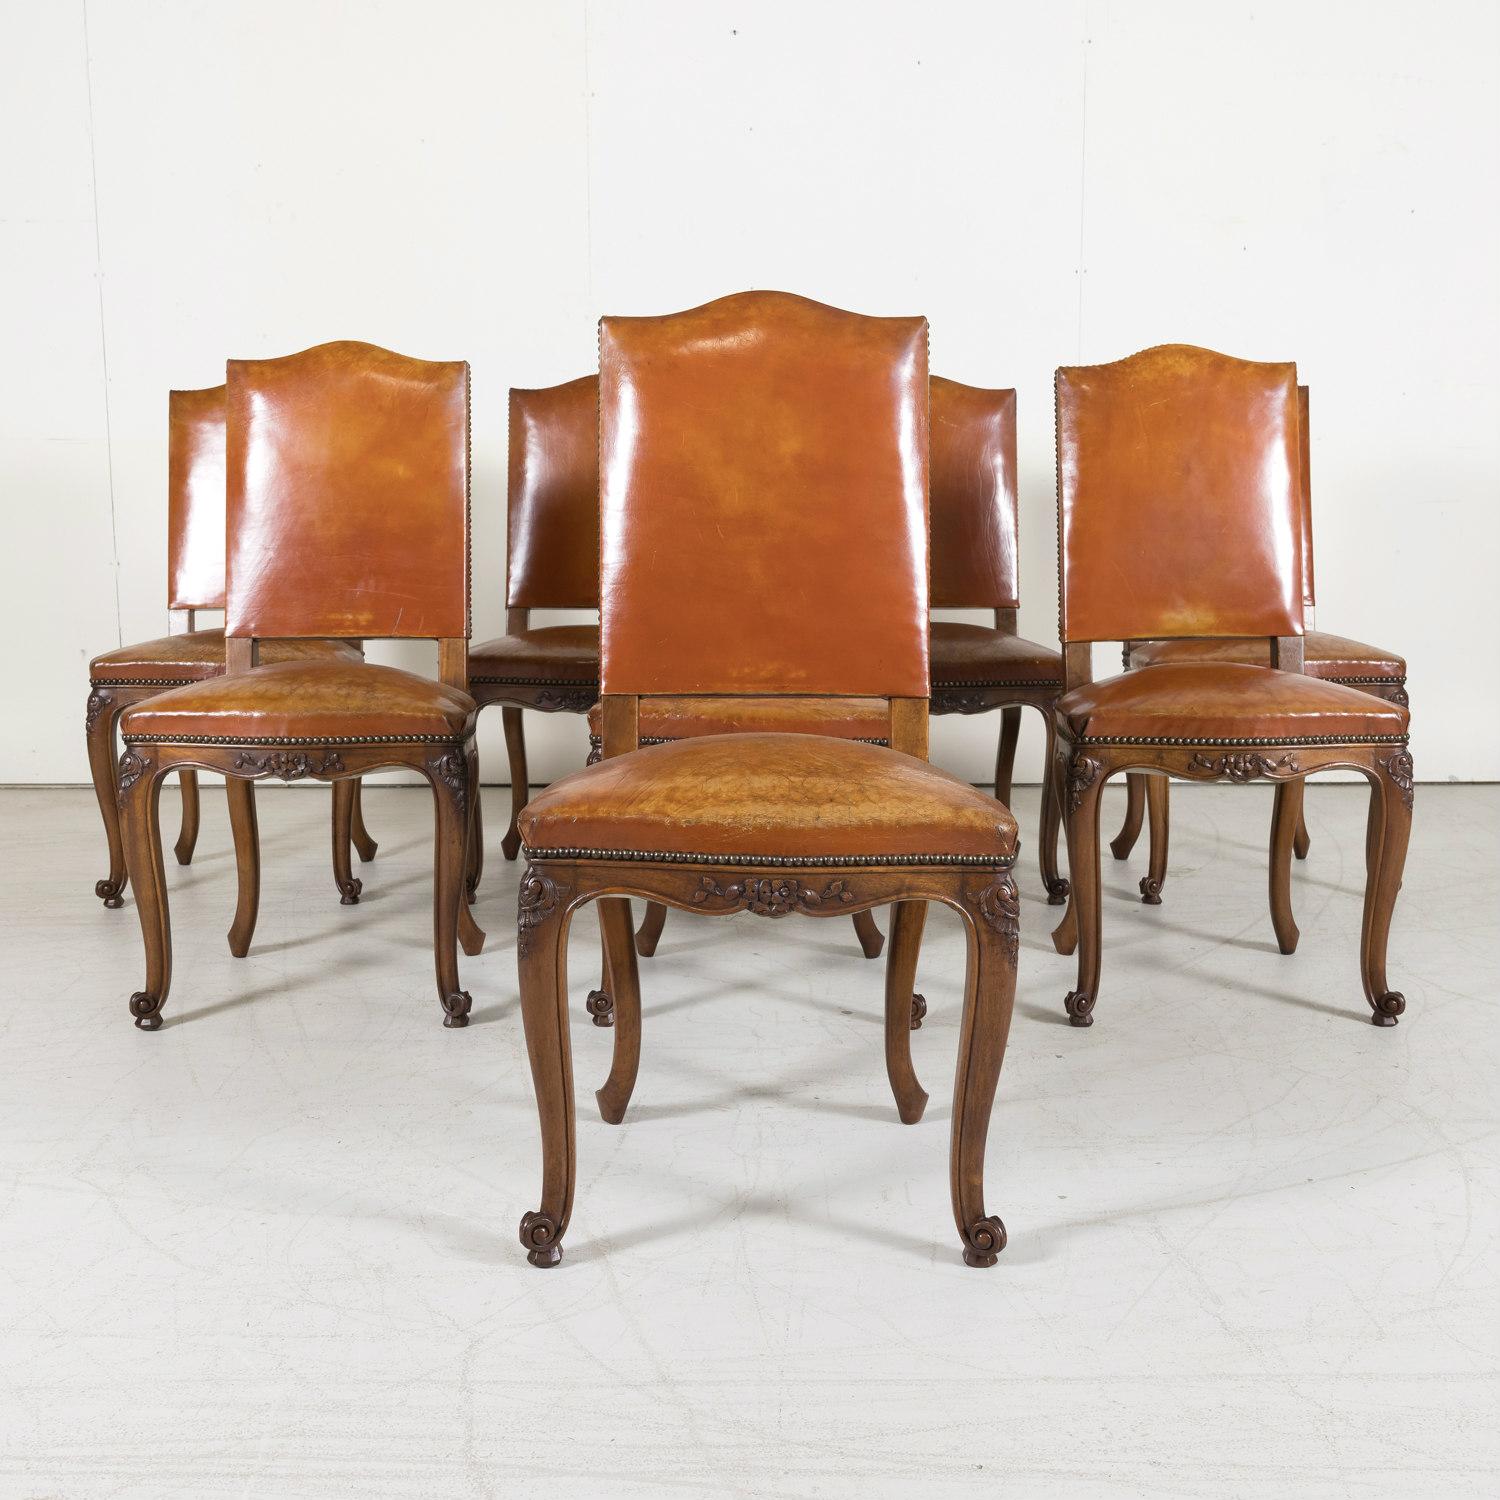 A set of 8 early 20th century French Louis XV style dining side chairs handcrafted in the Loire Valley near Paris, circa 1900, having high slightly slanted chapeau de gendarme backs with cognac color leather upholstery secured with brass nail heads